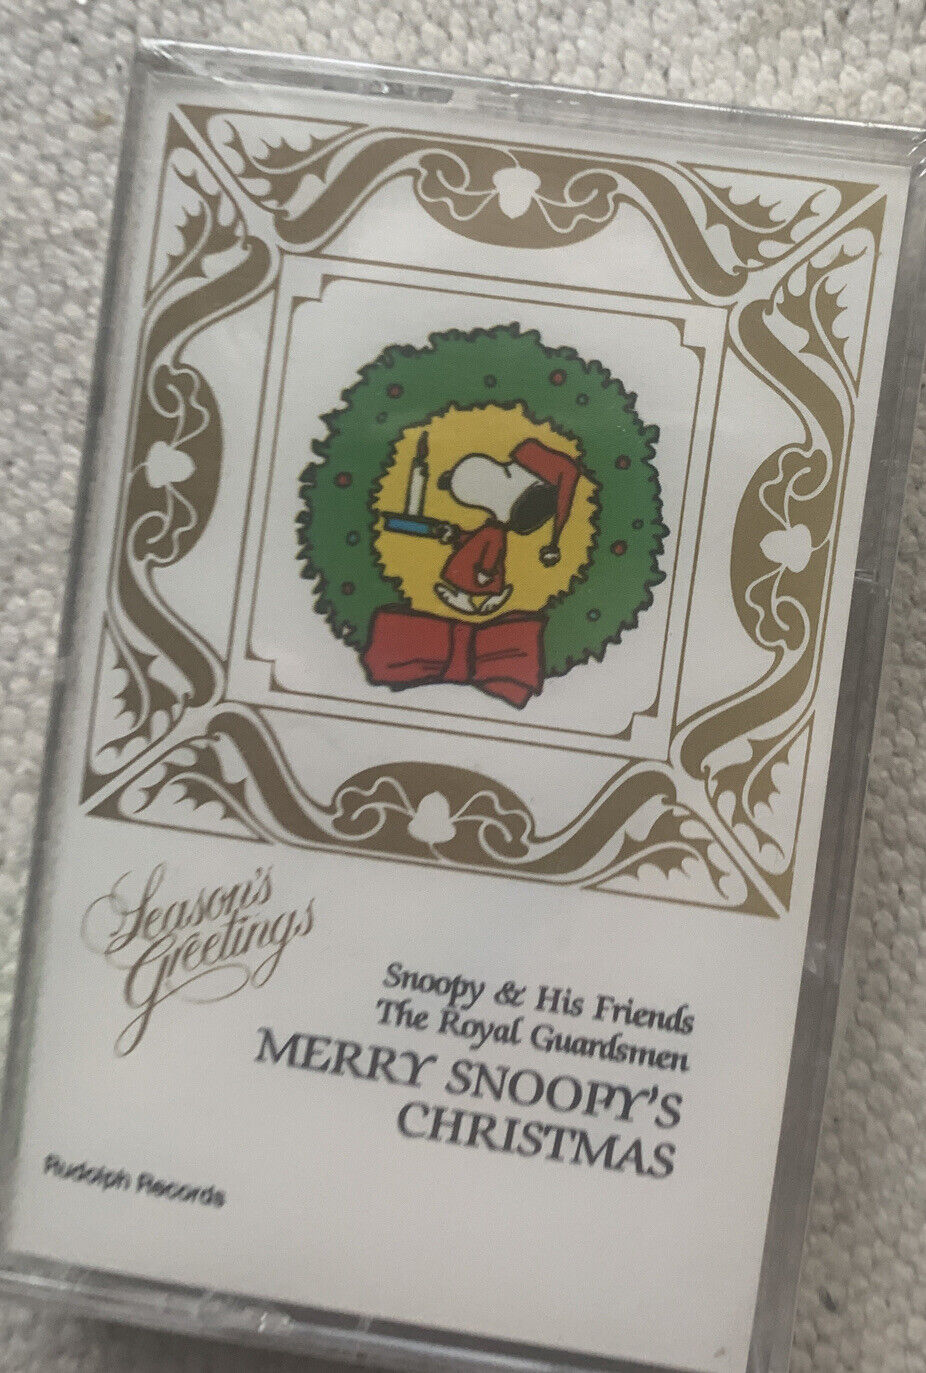 SNOOPY & HIS FRIENDS THE ROYAL GUARDMEN-Merry Snoopy’s Christmas Cassette